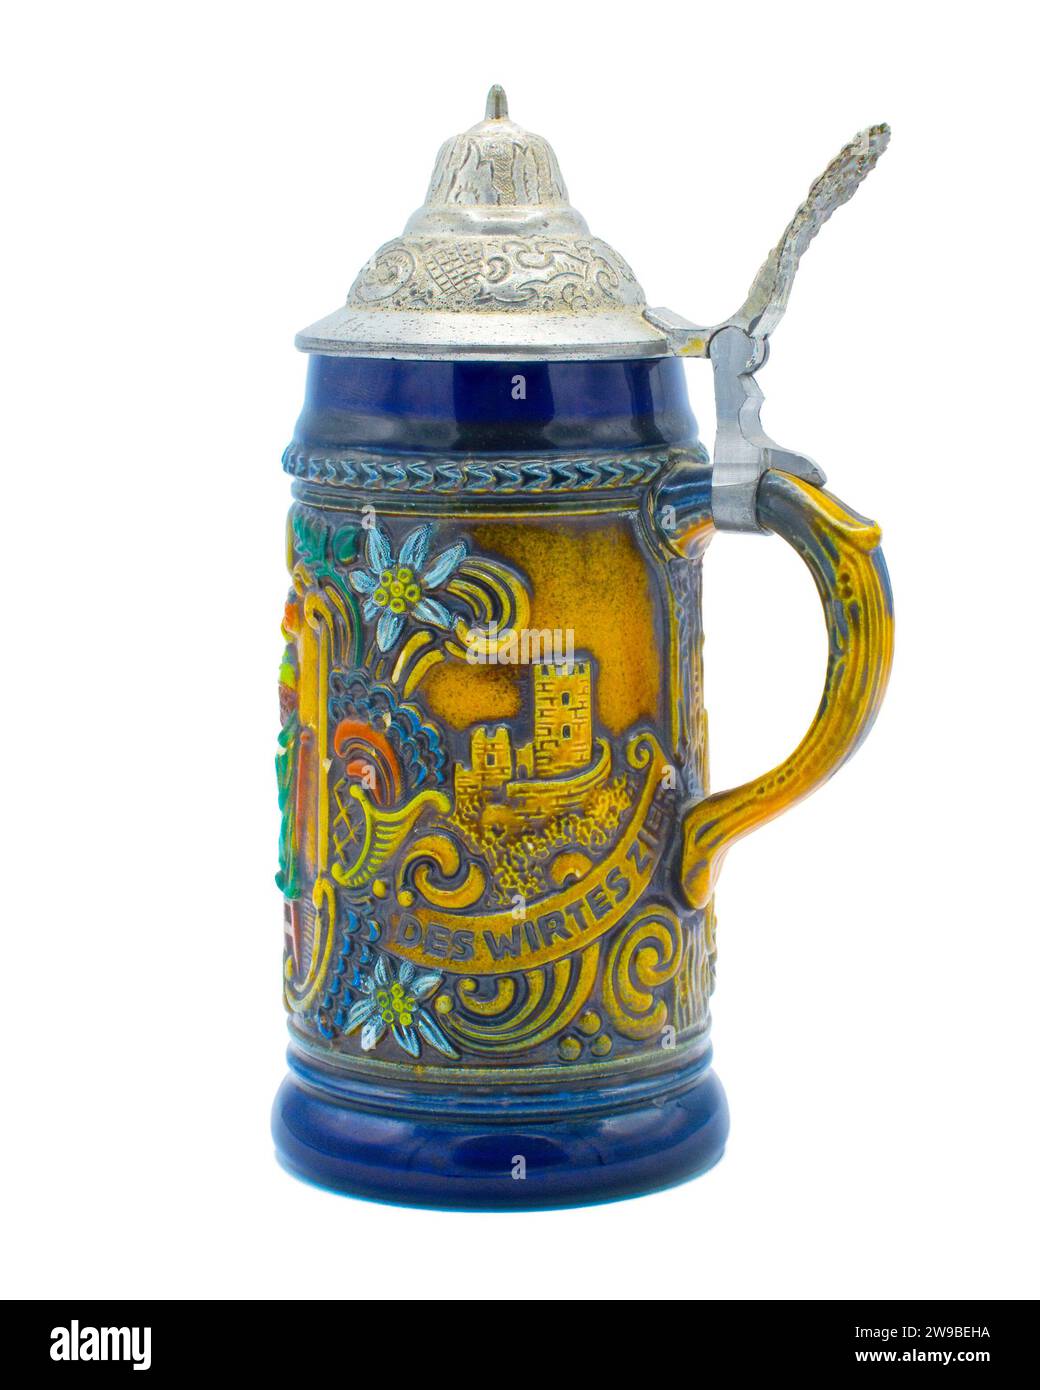 Old Vintage German beer stein Mug with pewter hinged top with words ein gutes bier des wirtes zier good beer from the landlord and men drinking at a t Stock Photo